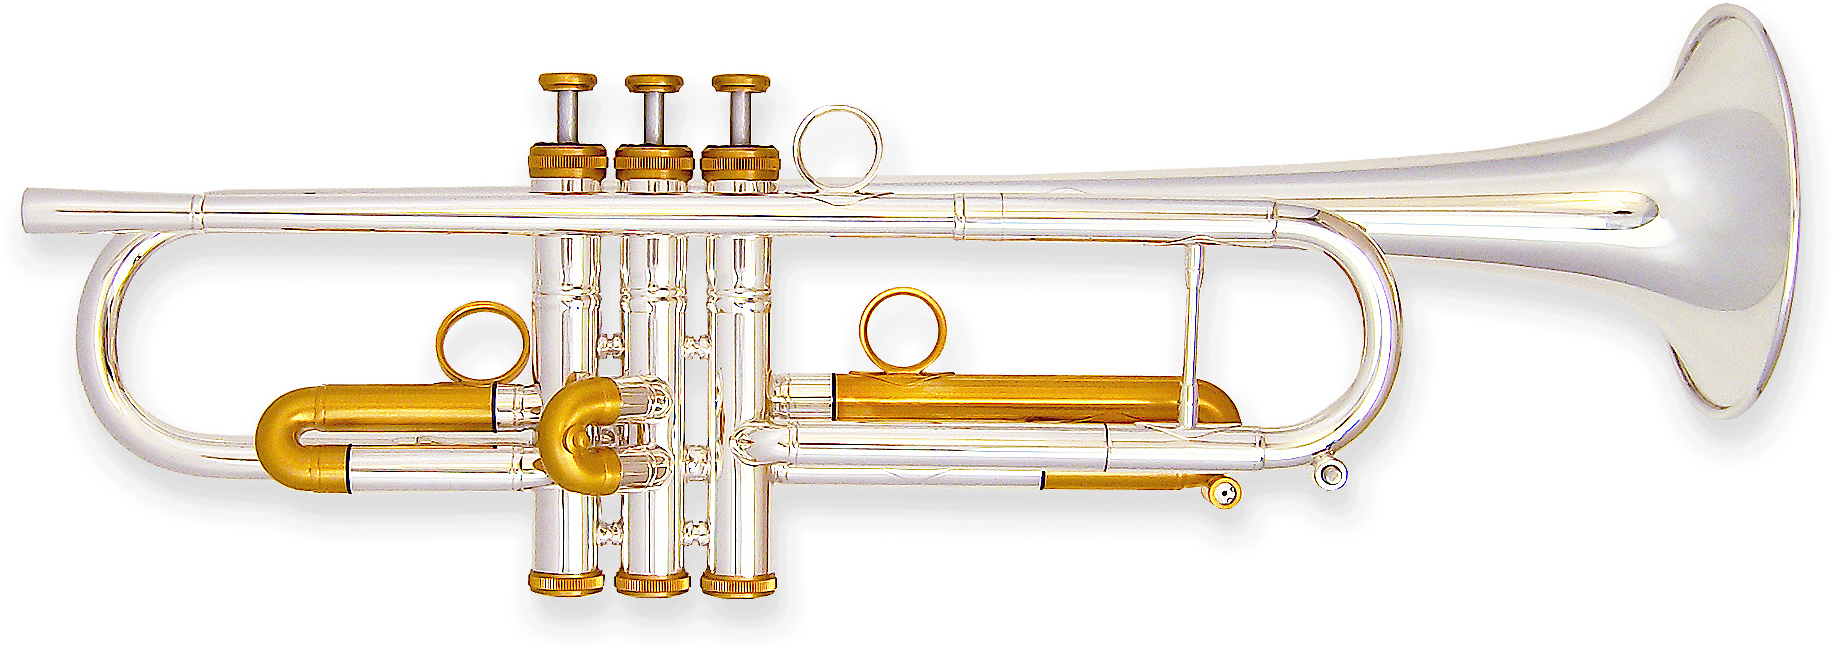 Silverand Gold Trumpet PNG image